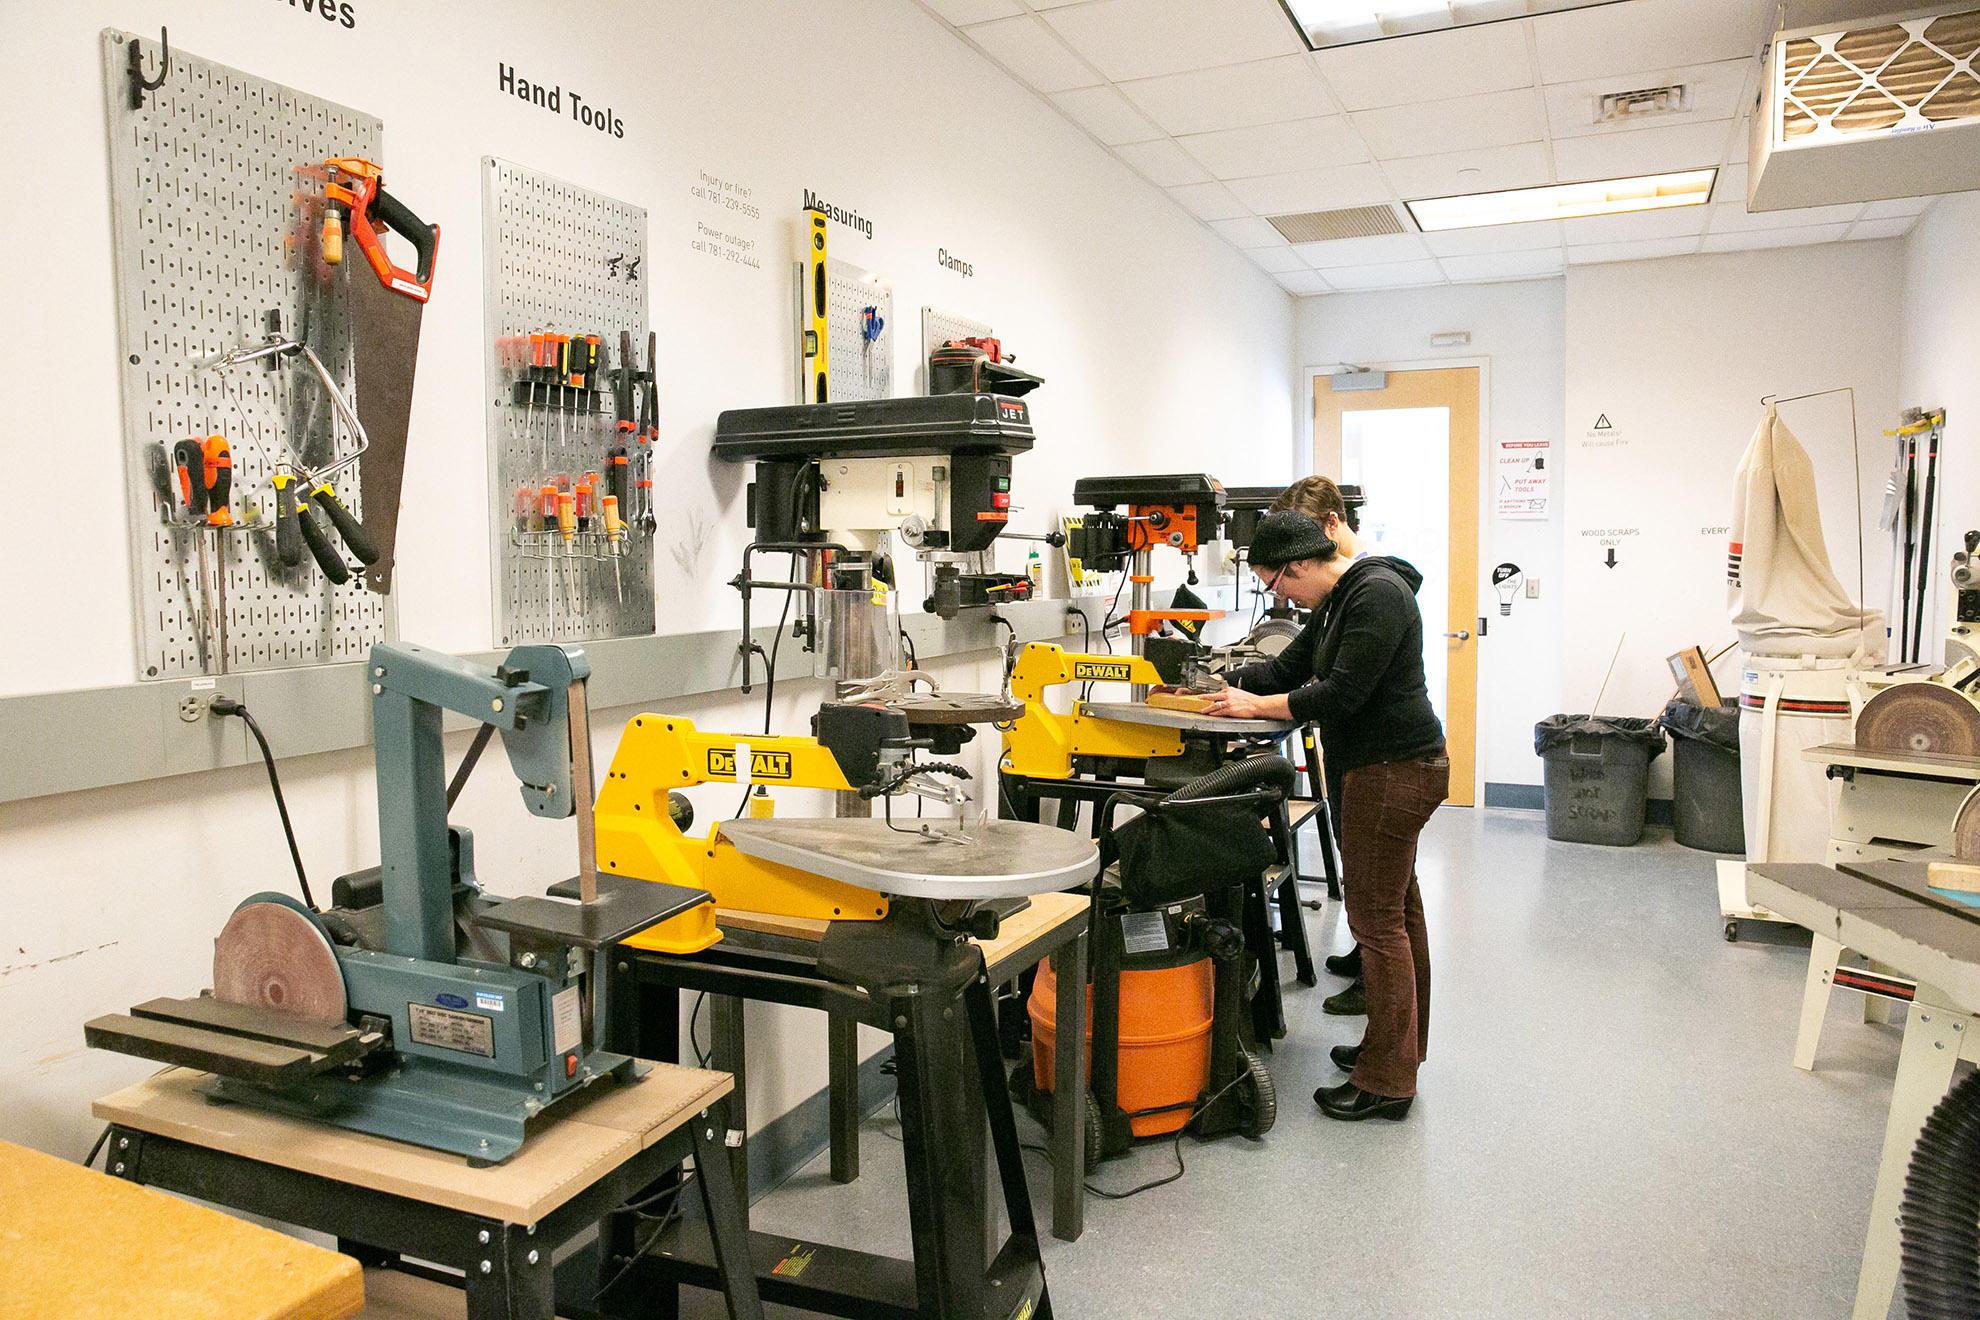 A look inside the Advanced Woodshop at Olin College